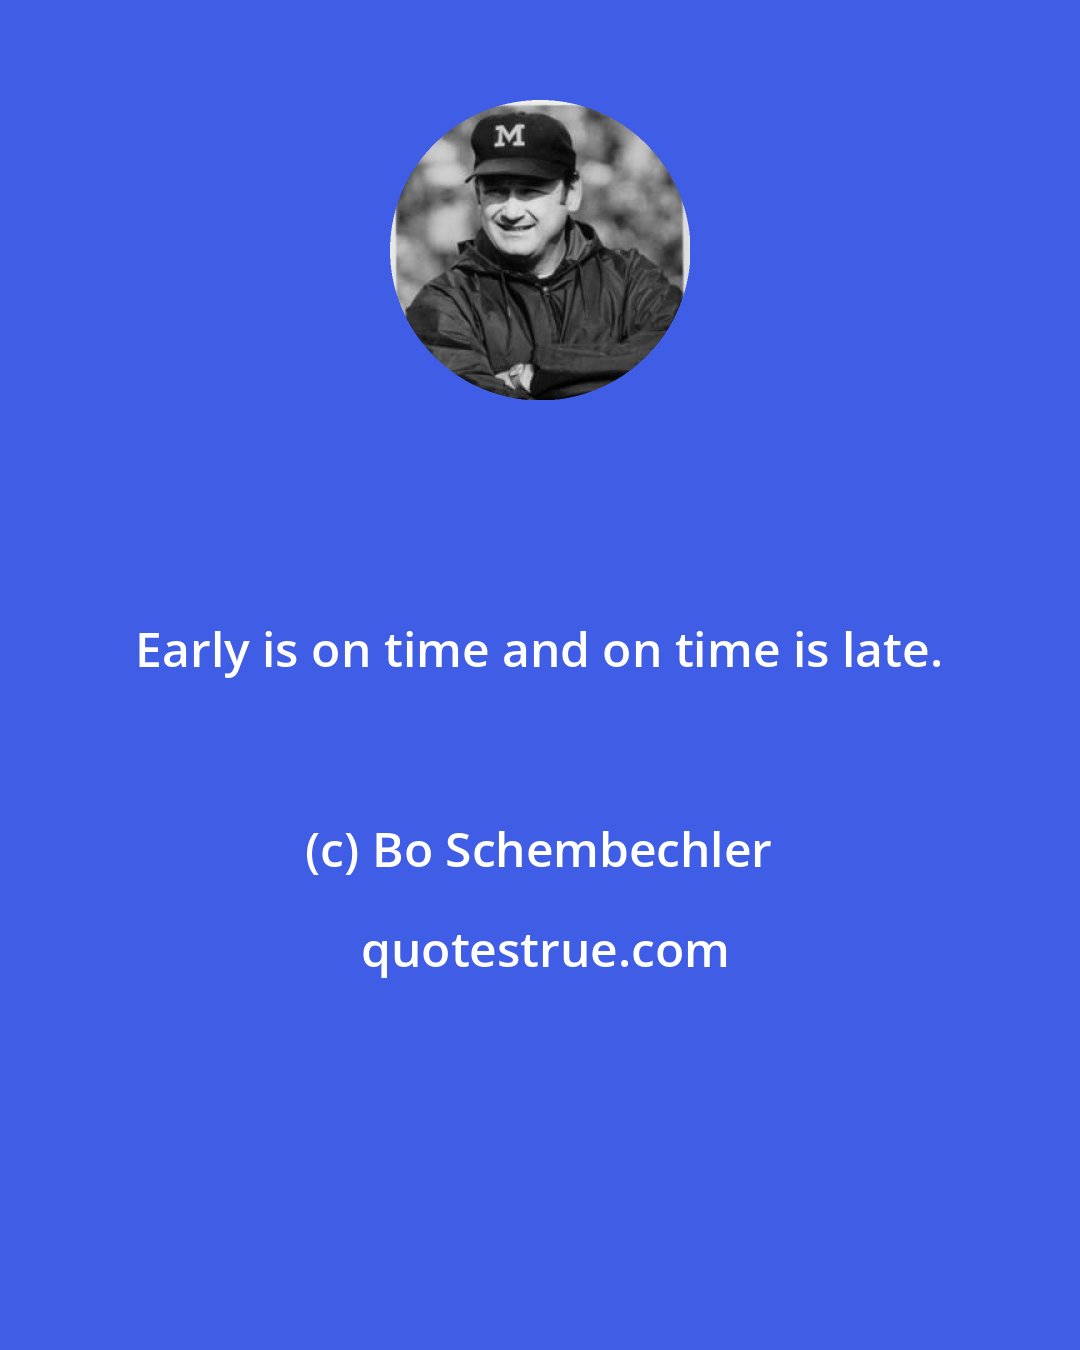 Bo Schembechler: Early is on time and on time is late.